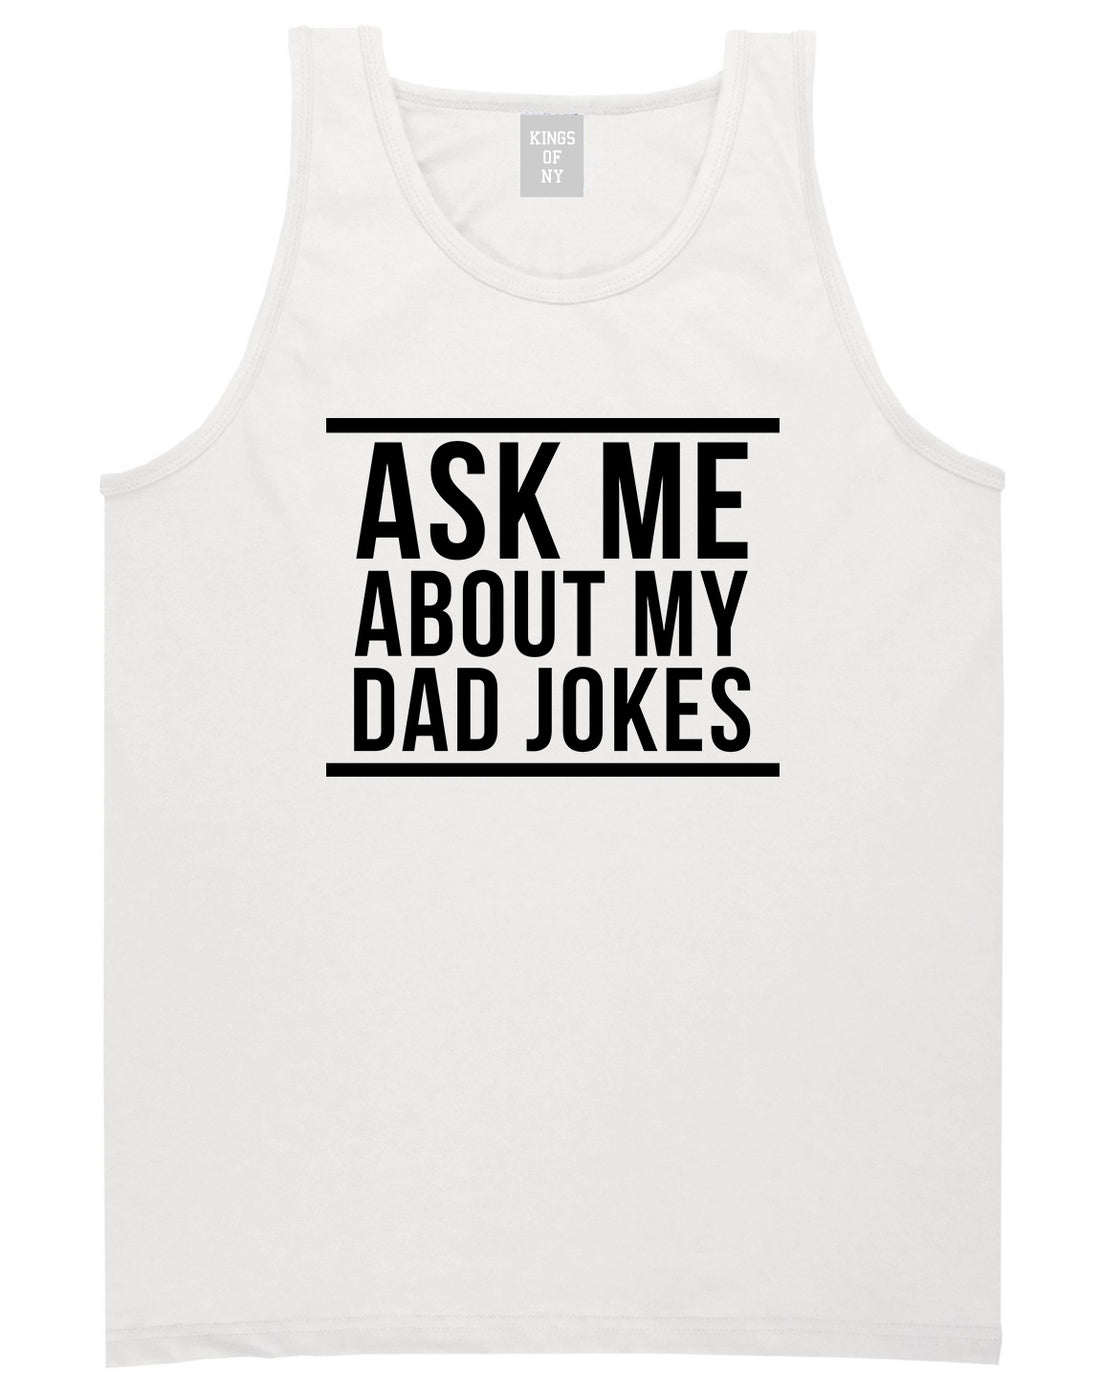 Ask Me About My Dad Jokes Mens Tank Top T-Shirt White